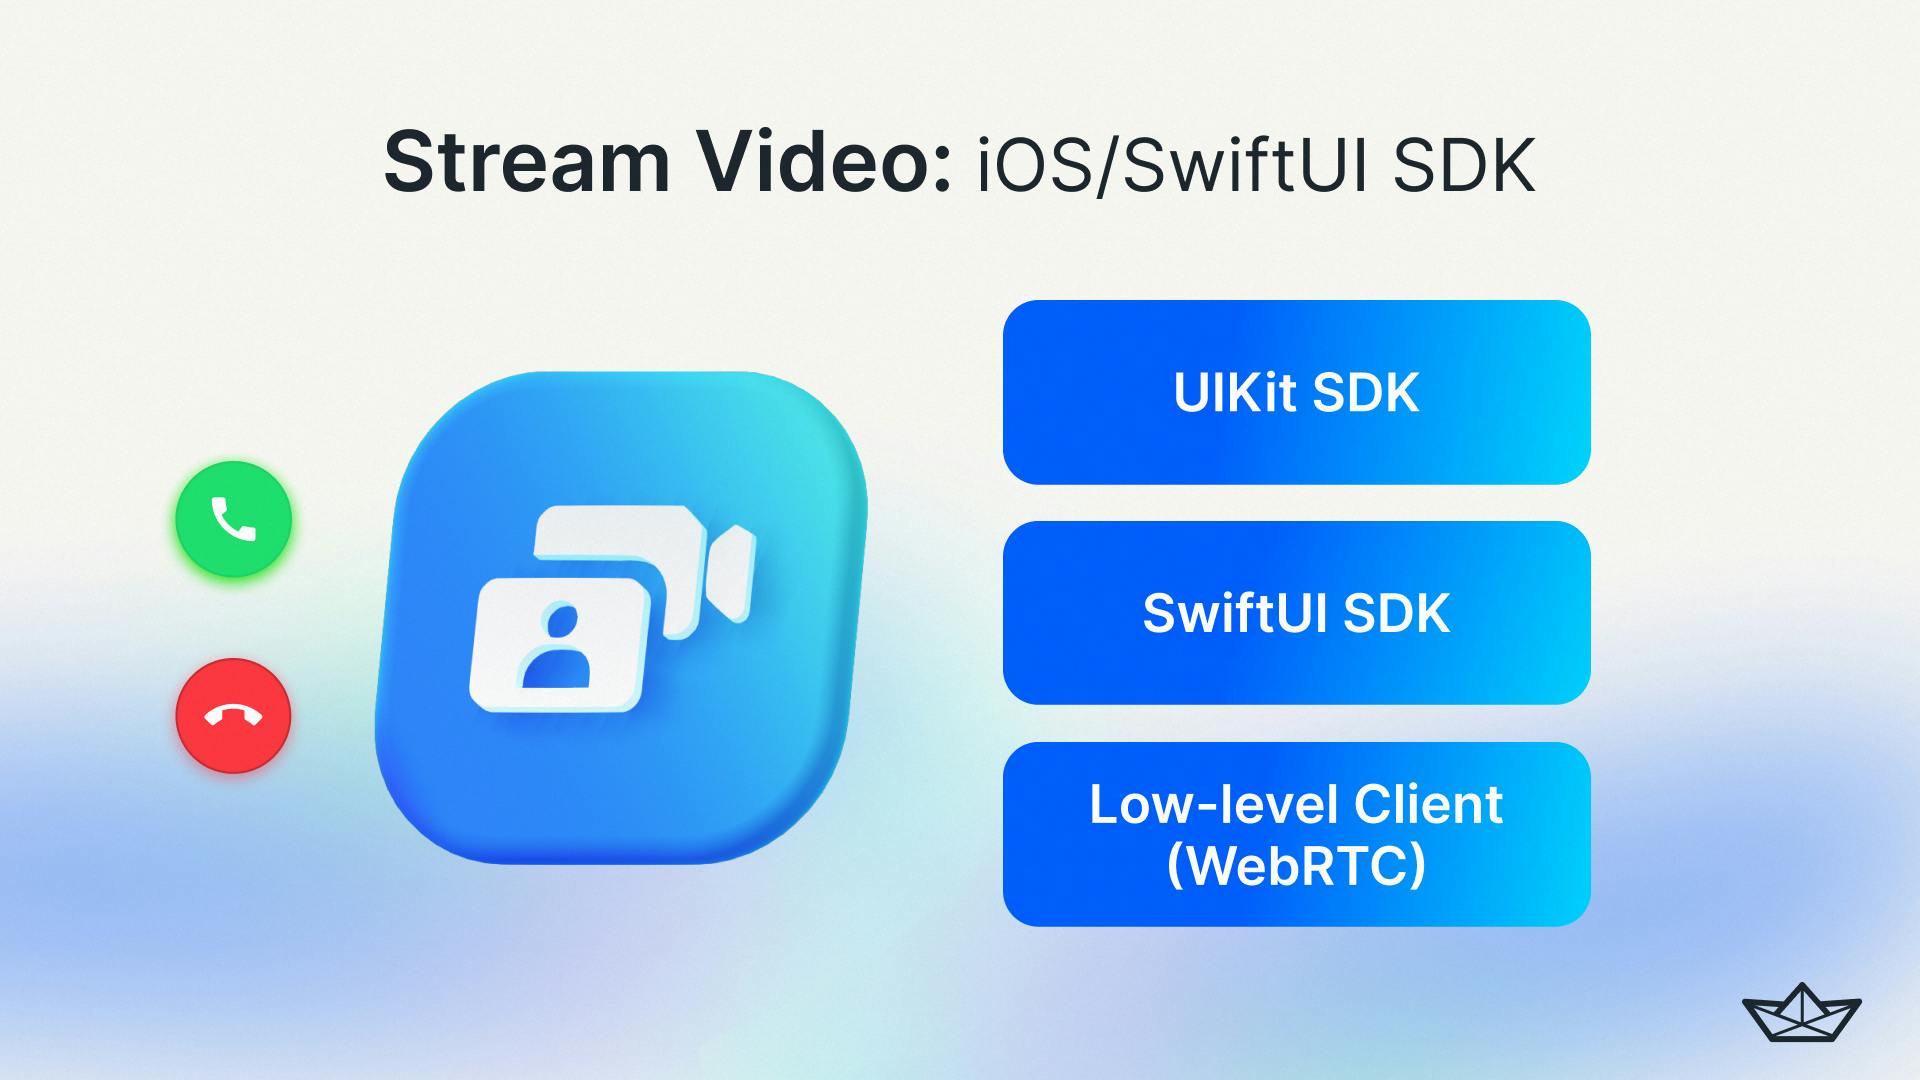 Components of the SDK